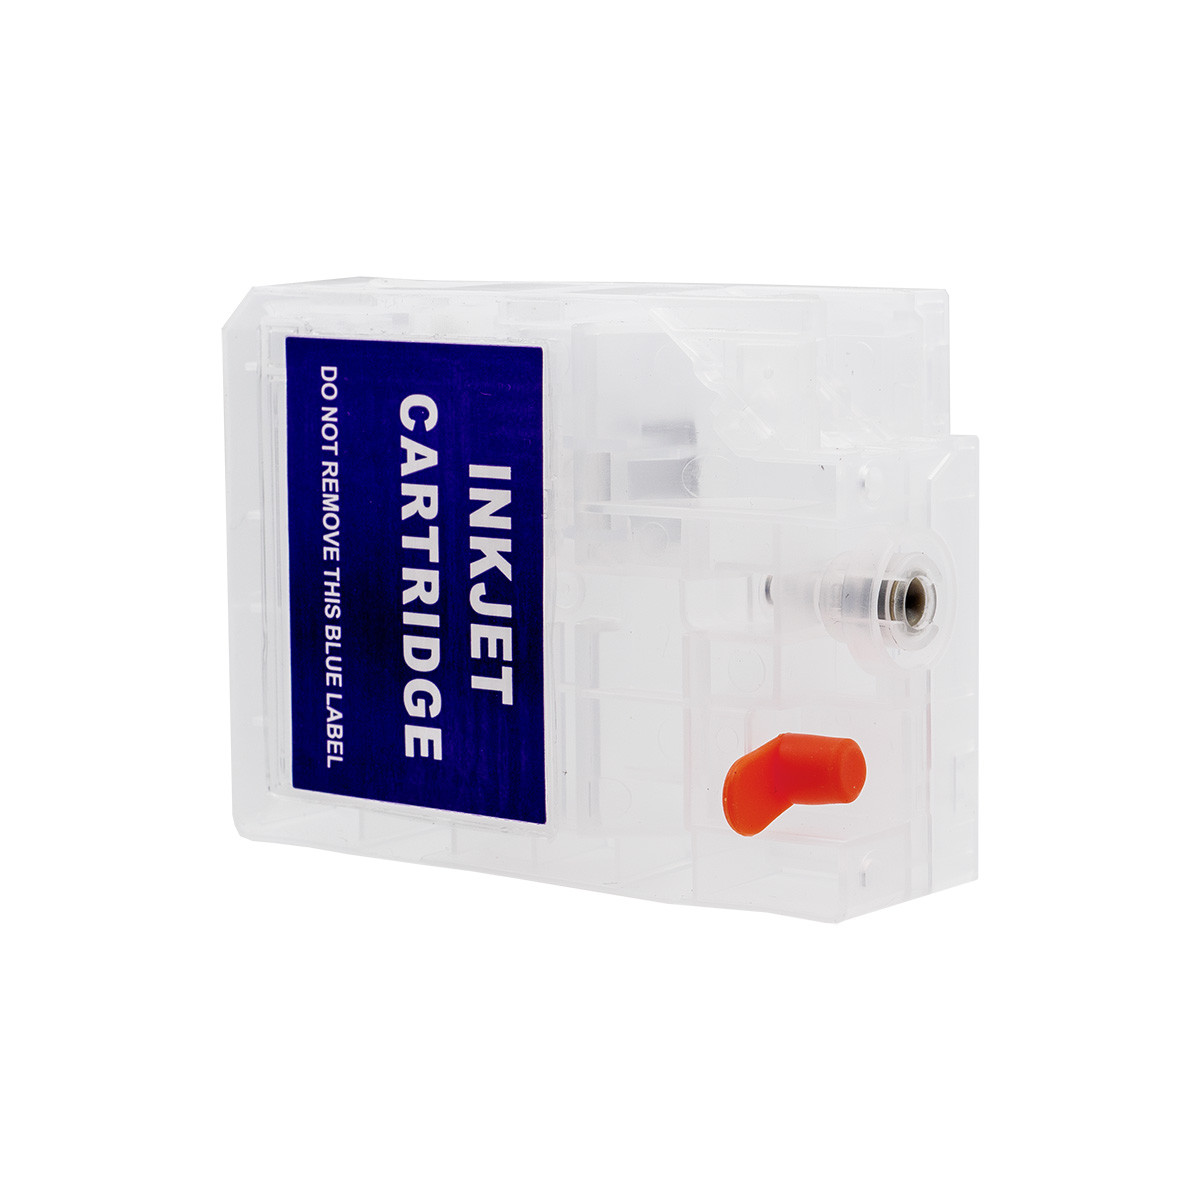 Refillcartridge for Surecolor SC-P700  (without Chip)